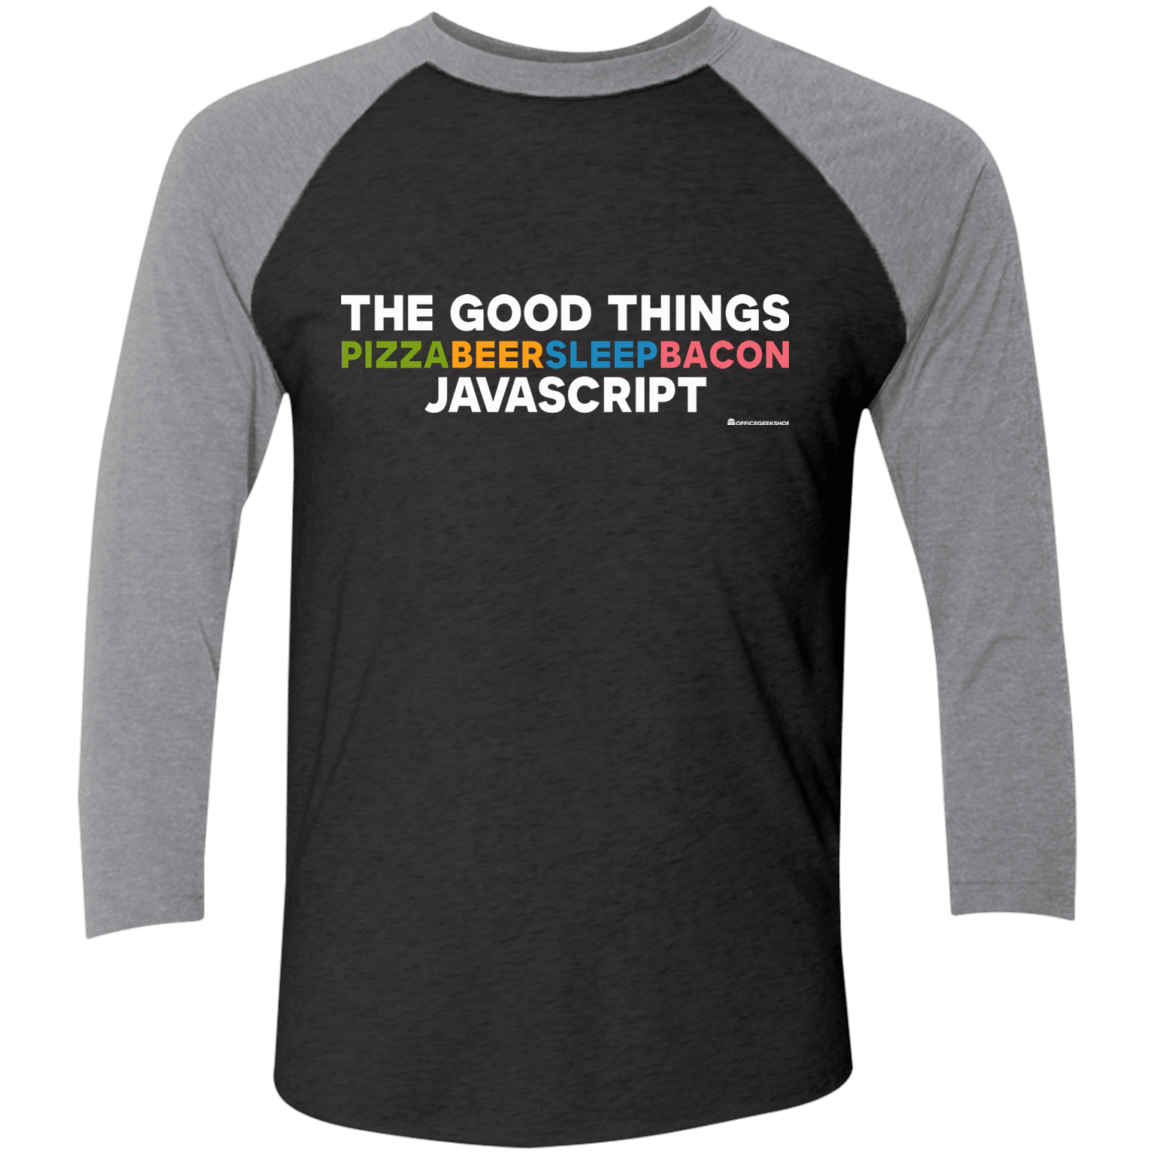 T-Shirts Vintage Black/Premium Heather / X-Small The Good Things Men's Triblend 3/4 Sleeve